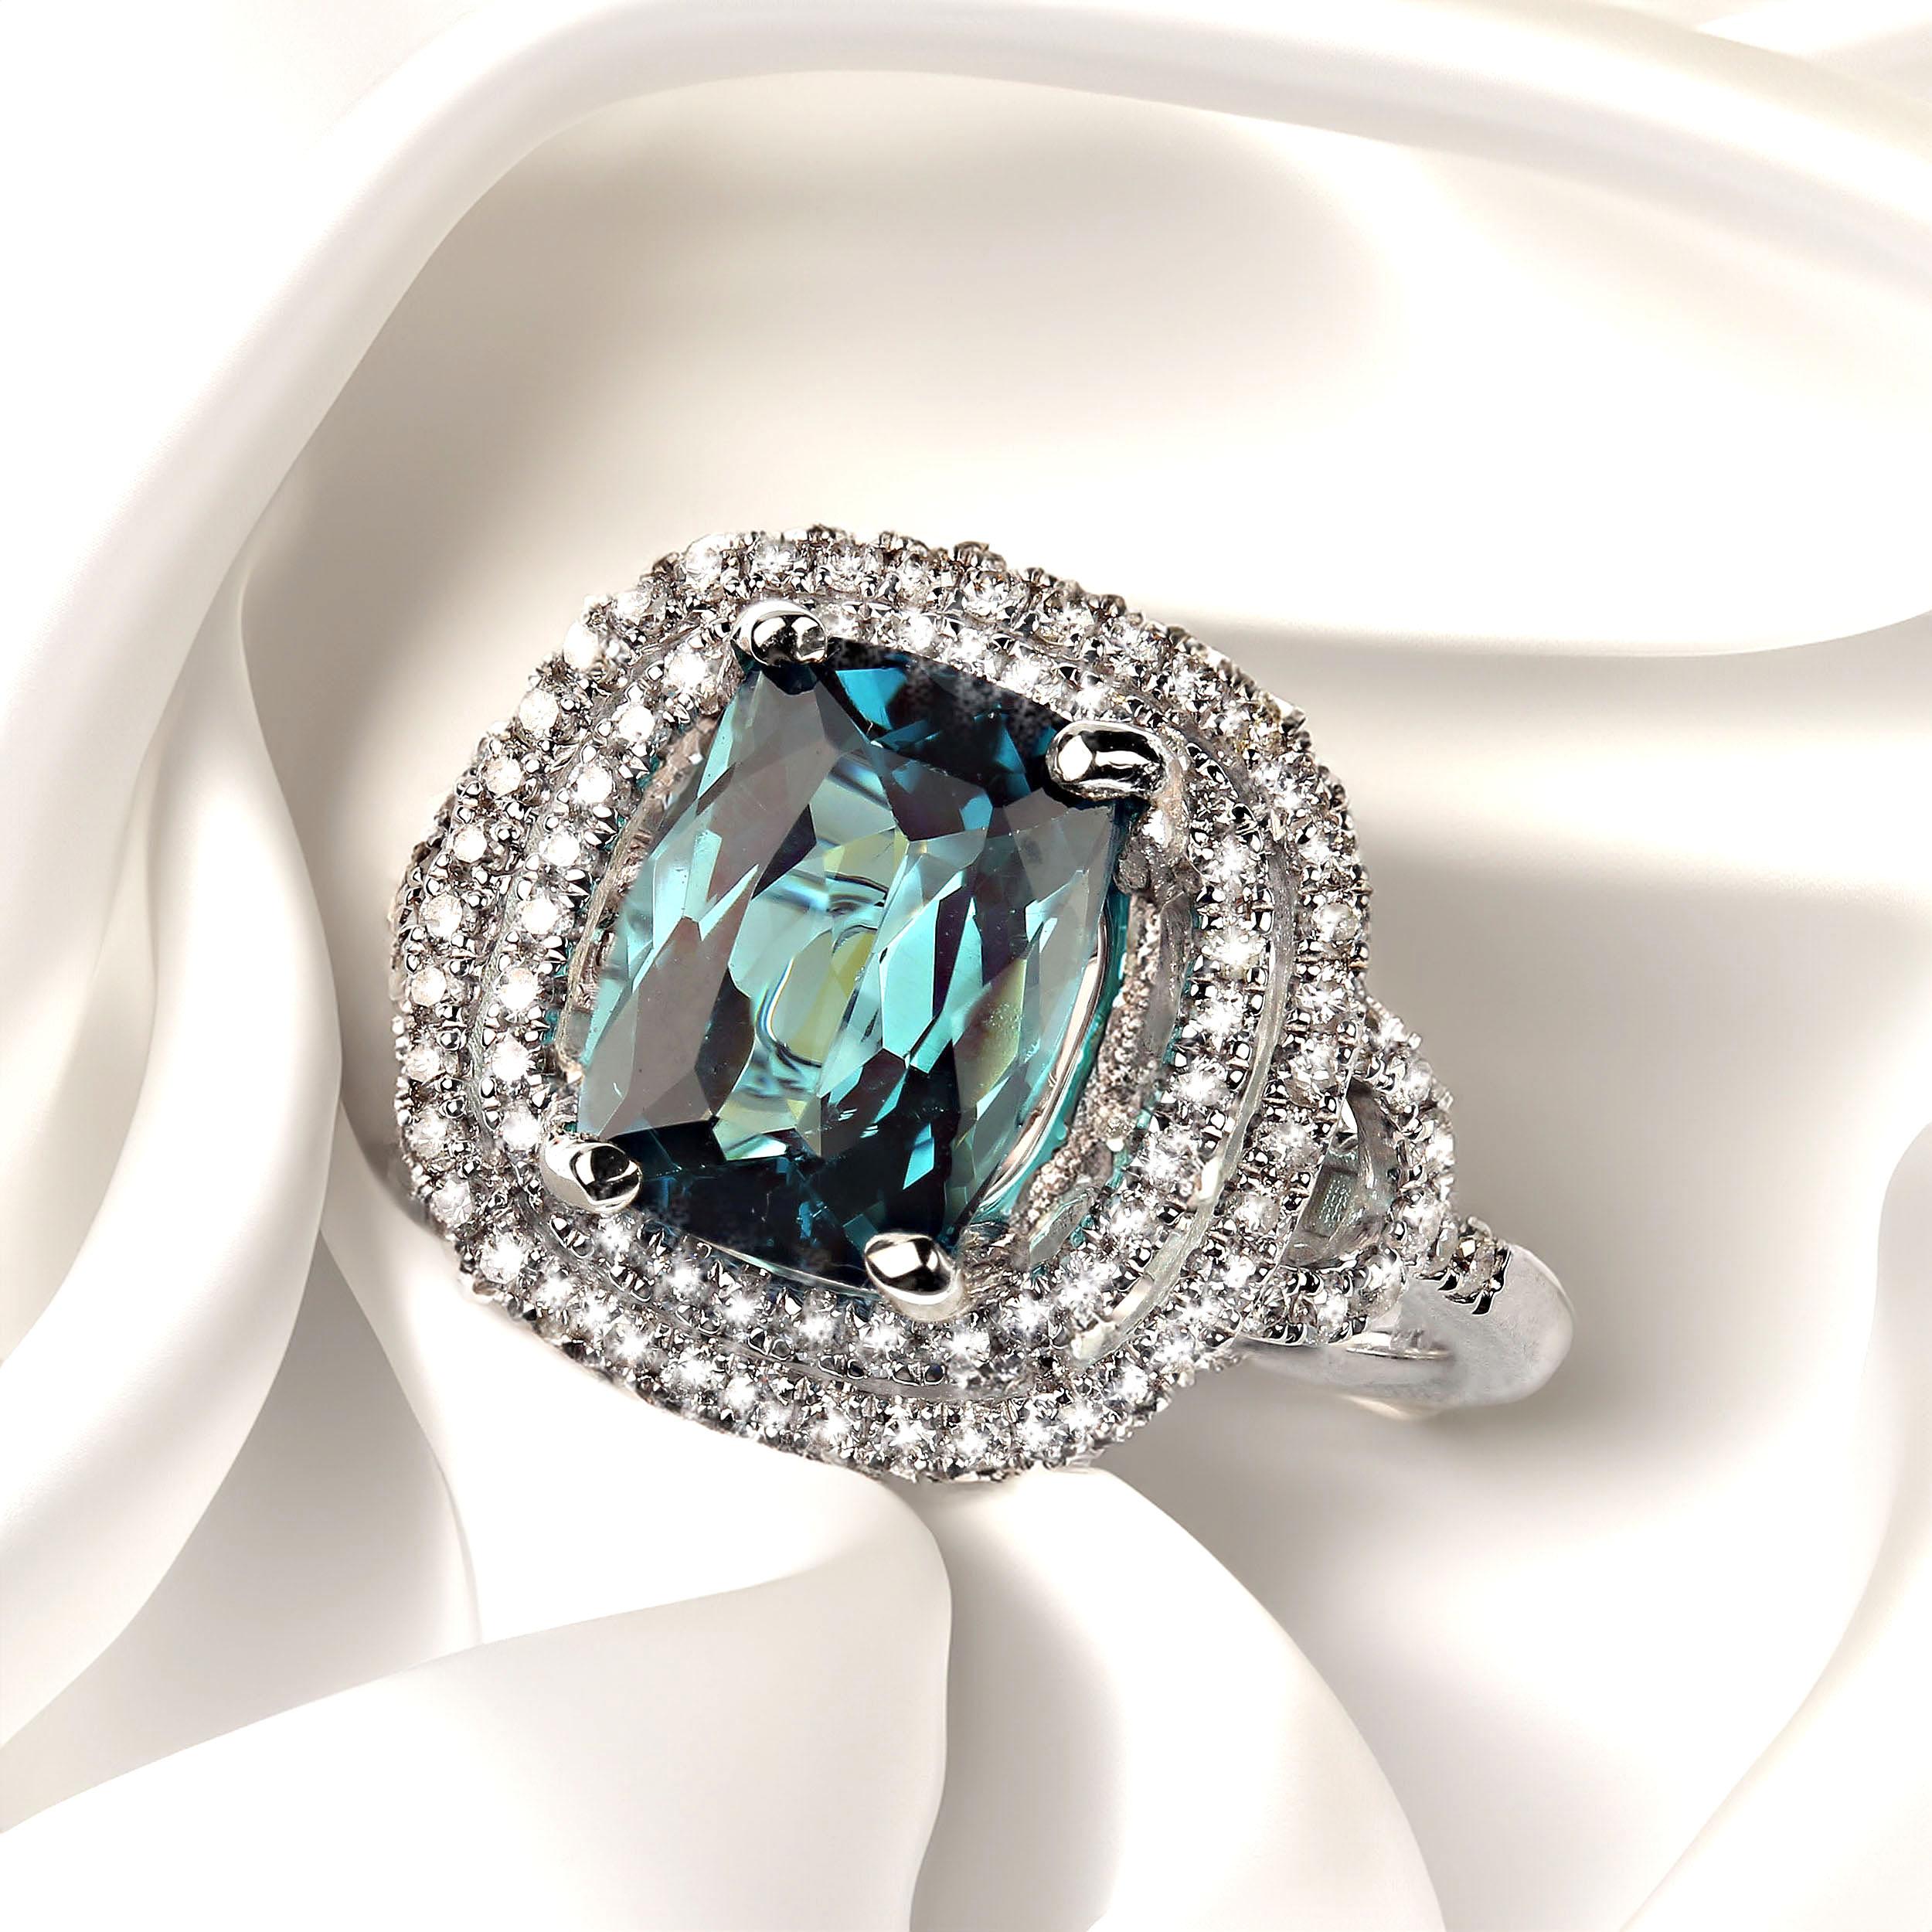 Blue indicolite tourmaline, 2.54ct, beautifully accented with two rows of diamonds. This antique cushion cut beauty comes straight from one of our favorite vendors in the mountains outside of Rio de Jameiro.  The setting is 14K white gold and